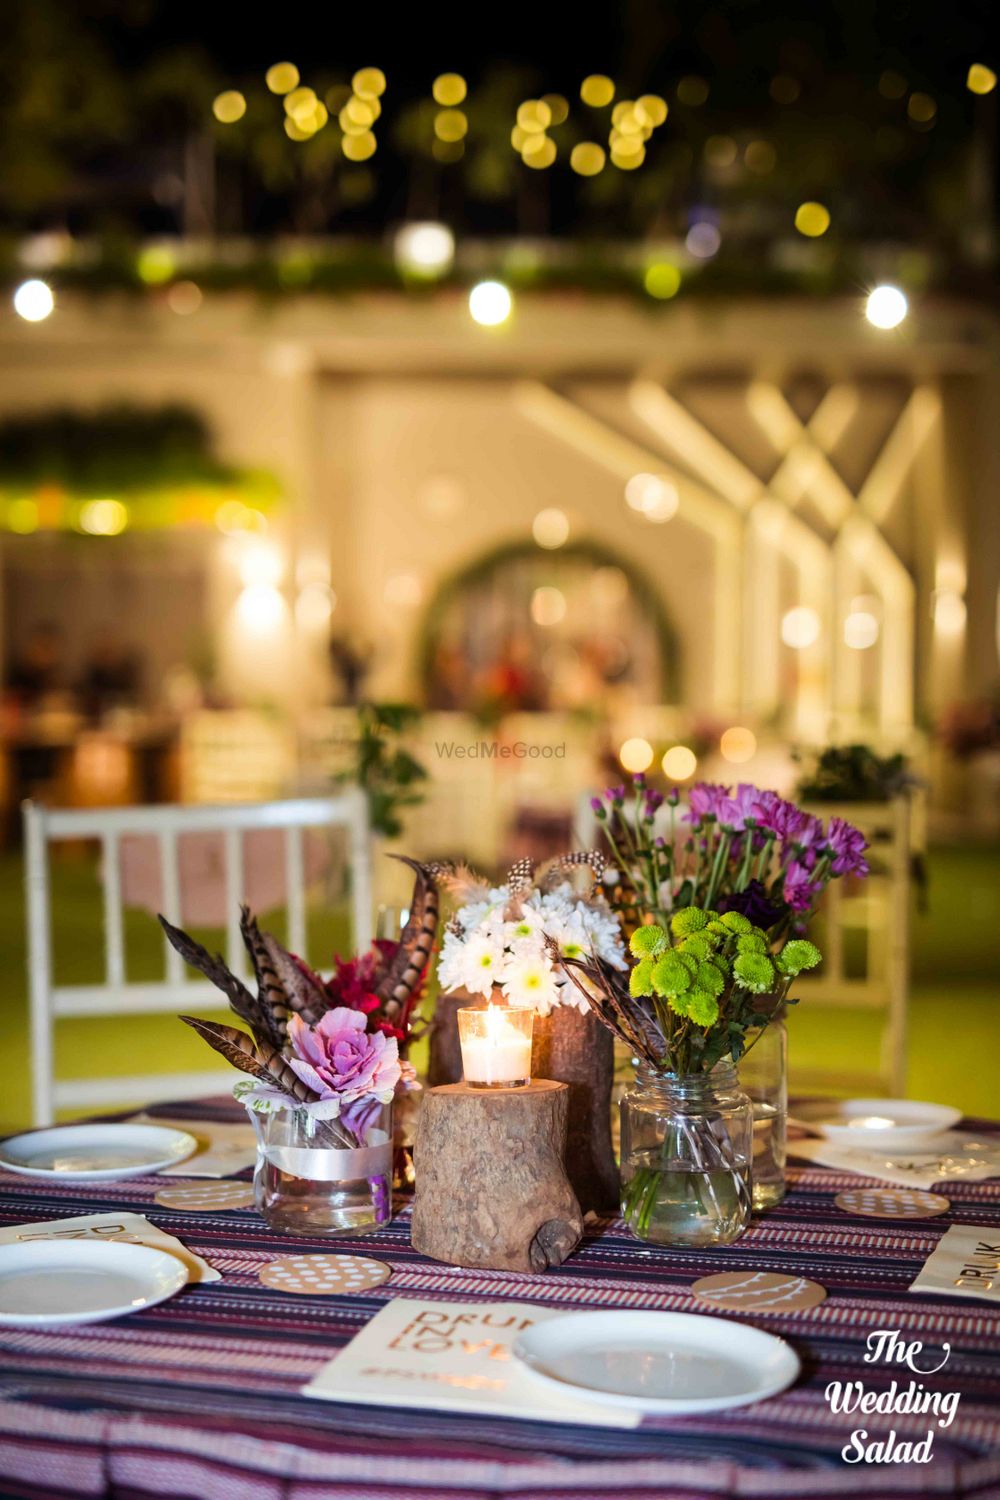 Photo of Table setting with flowers in glass jars and candles